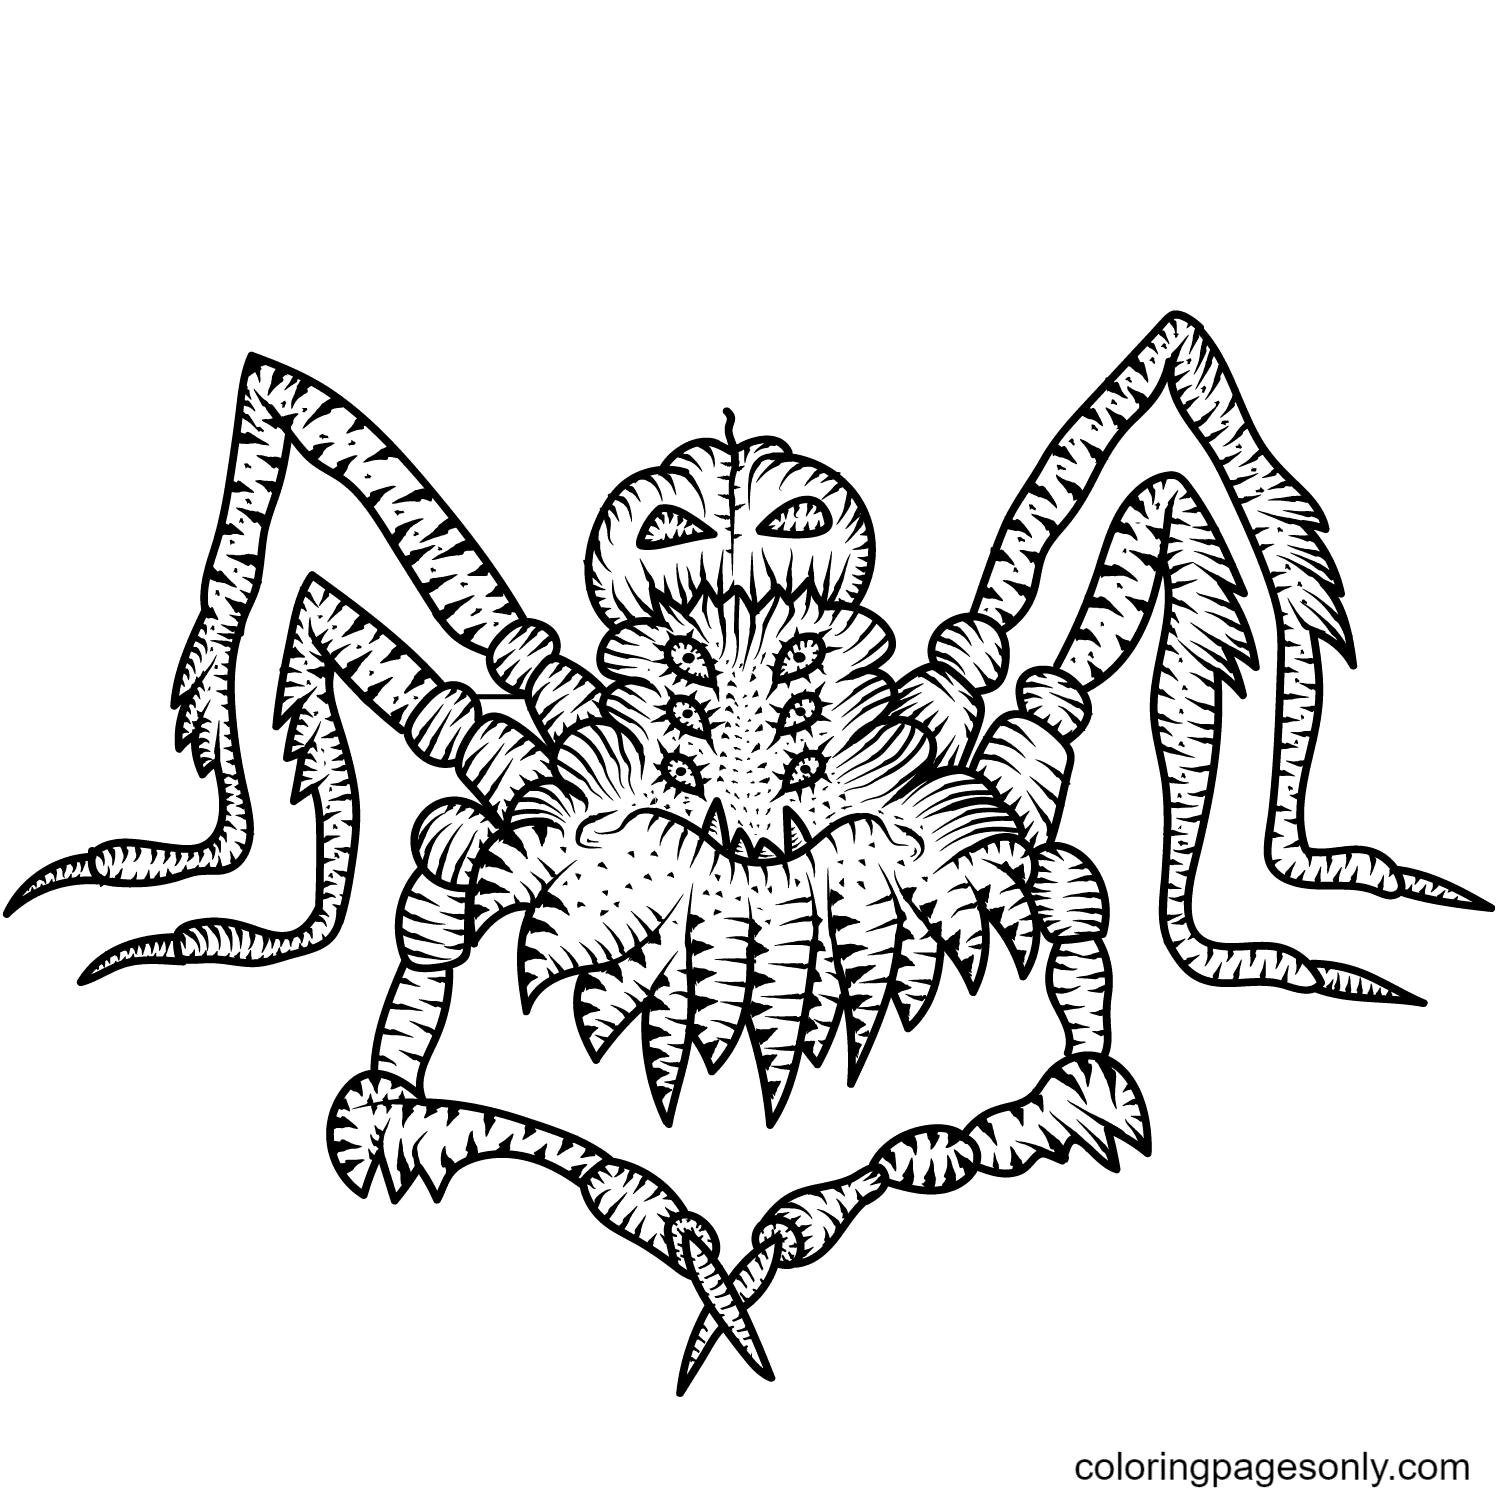 Scary Spider Free Coloring Page